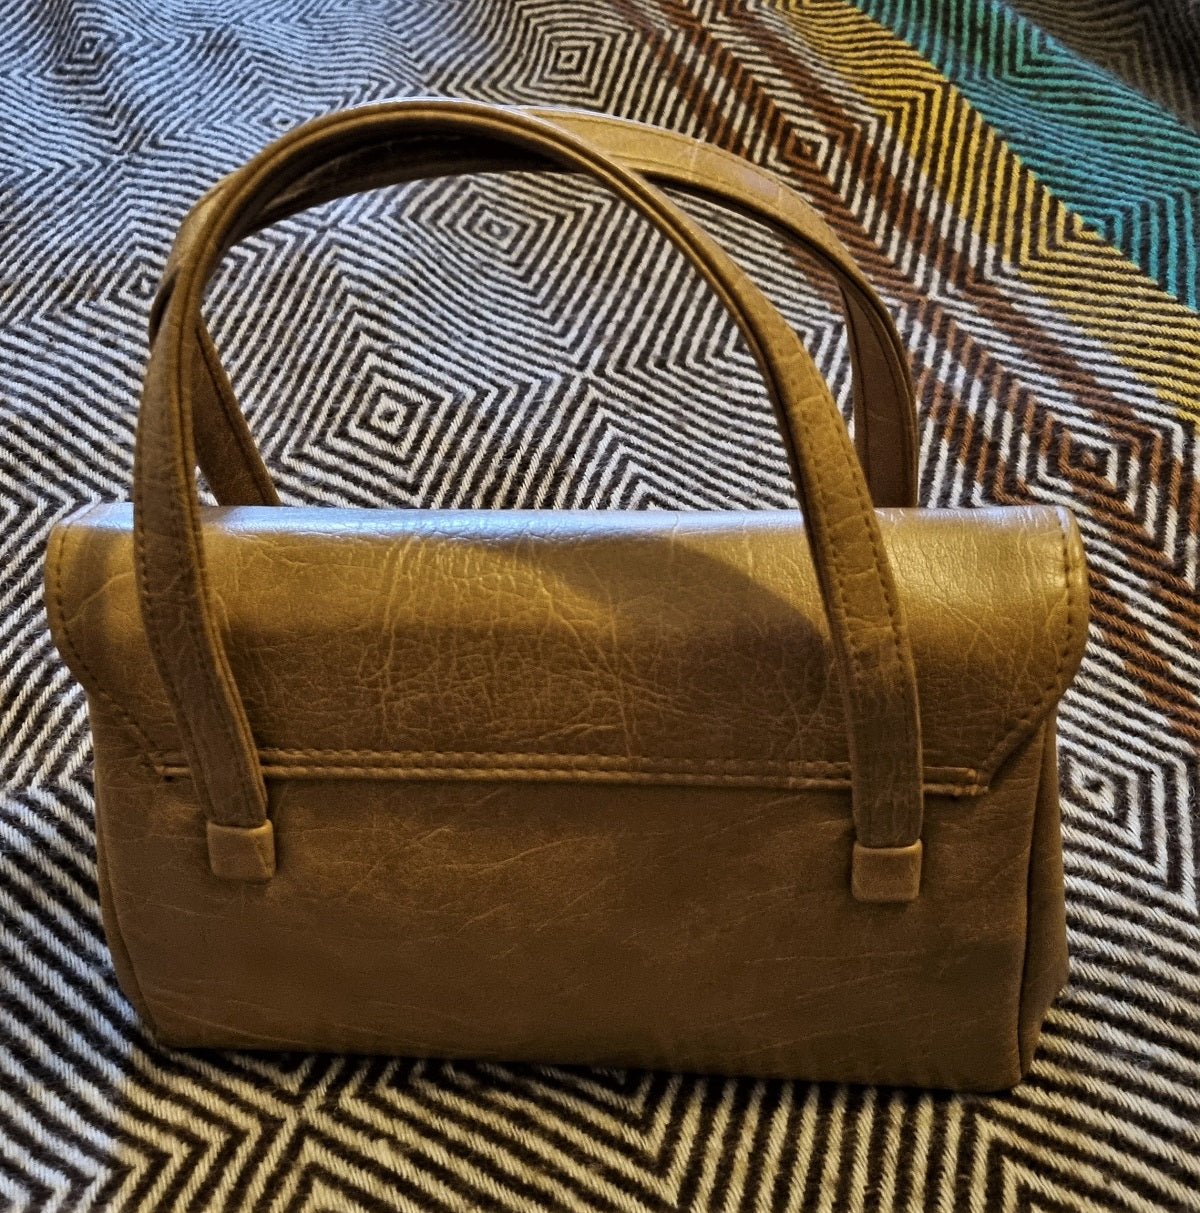 Texier tan leather Gladstone bag – The Frockery